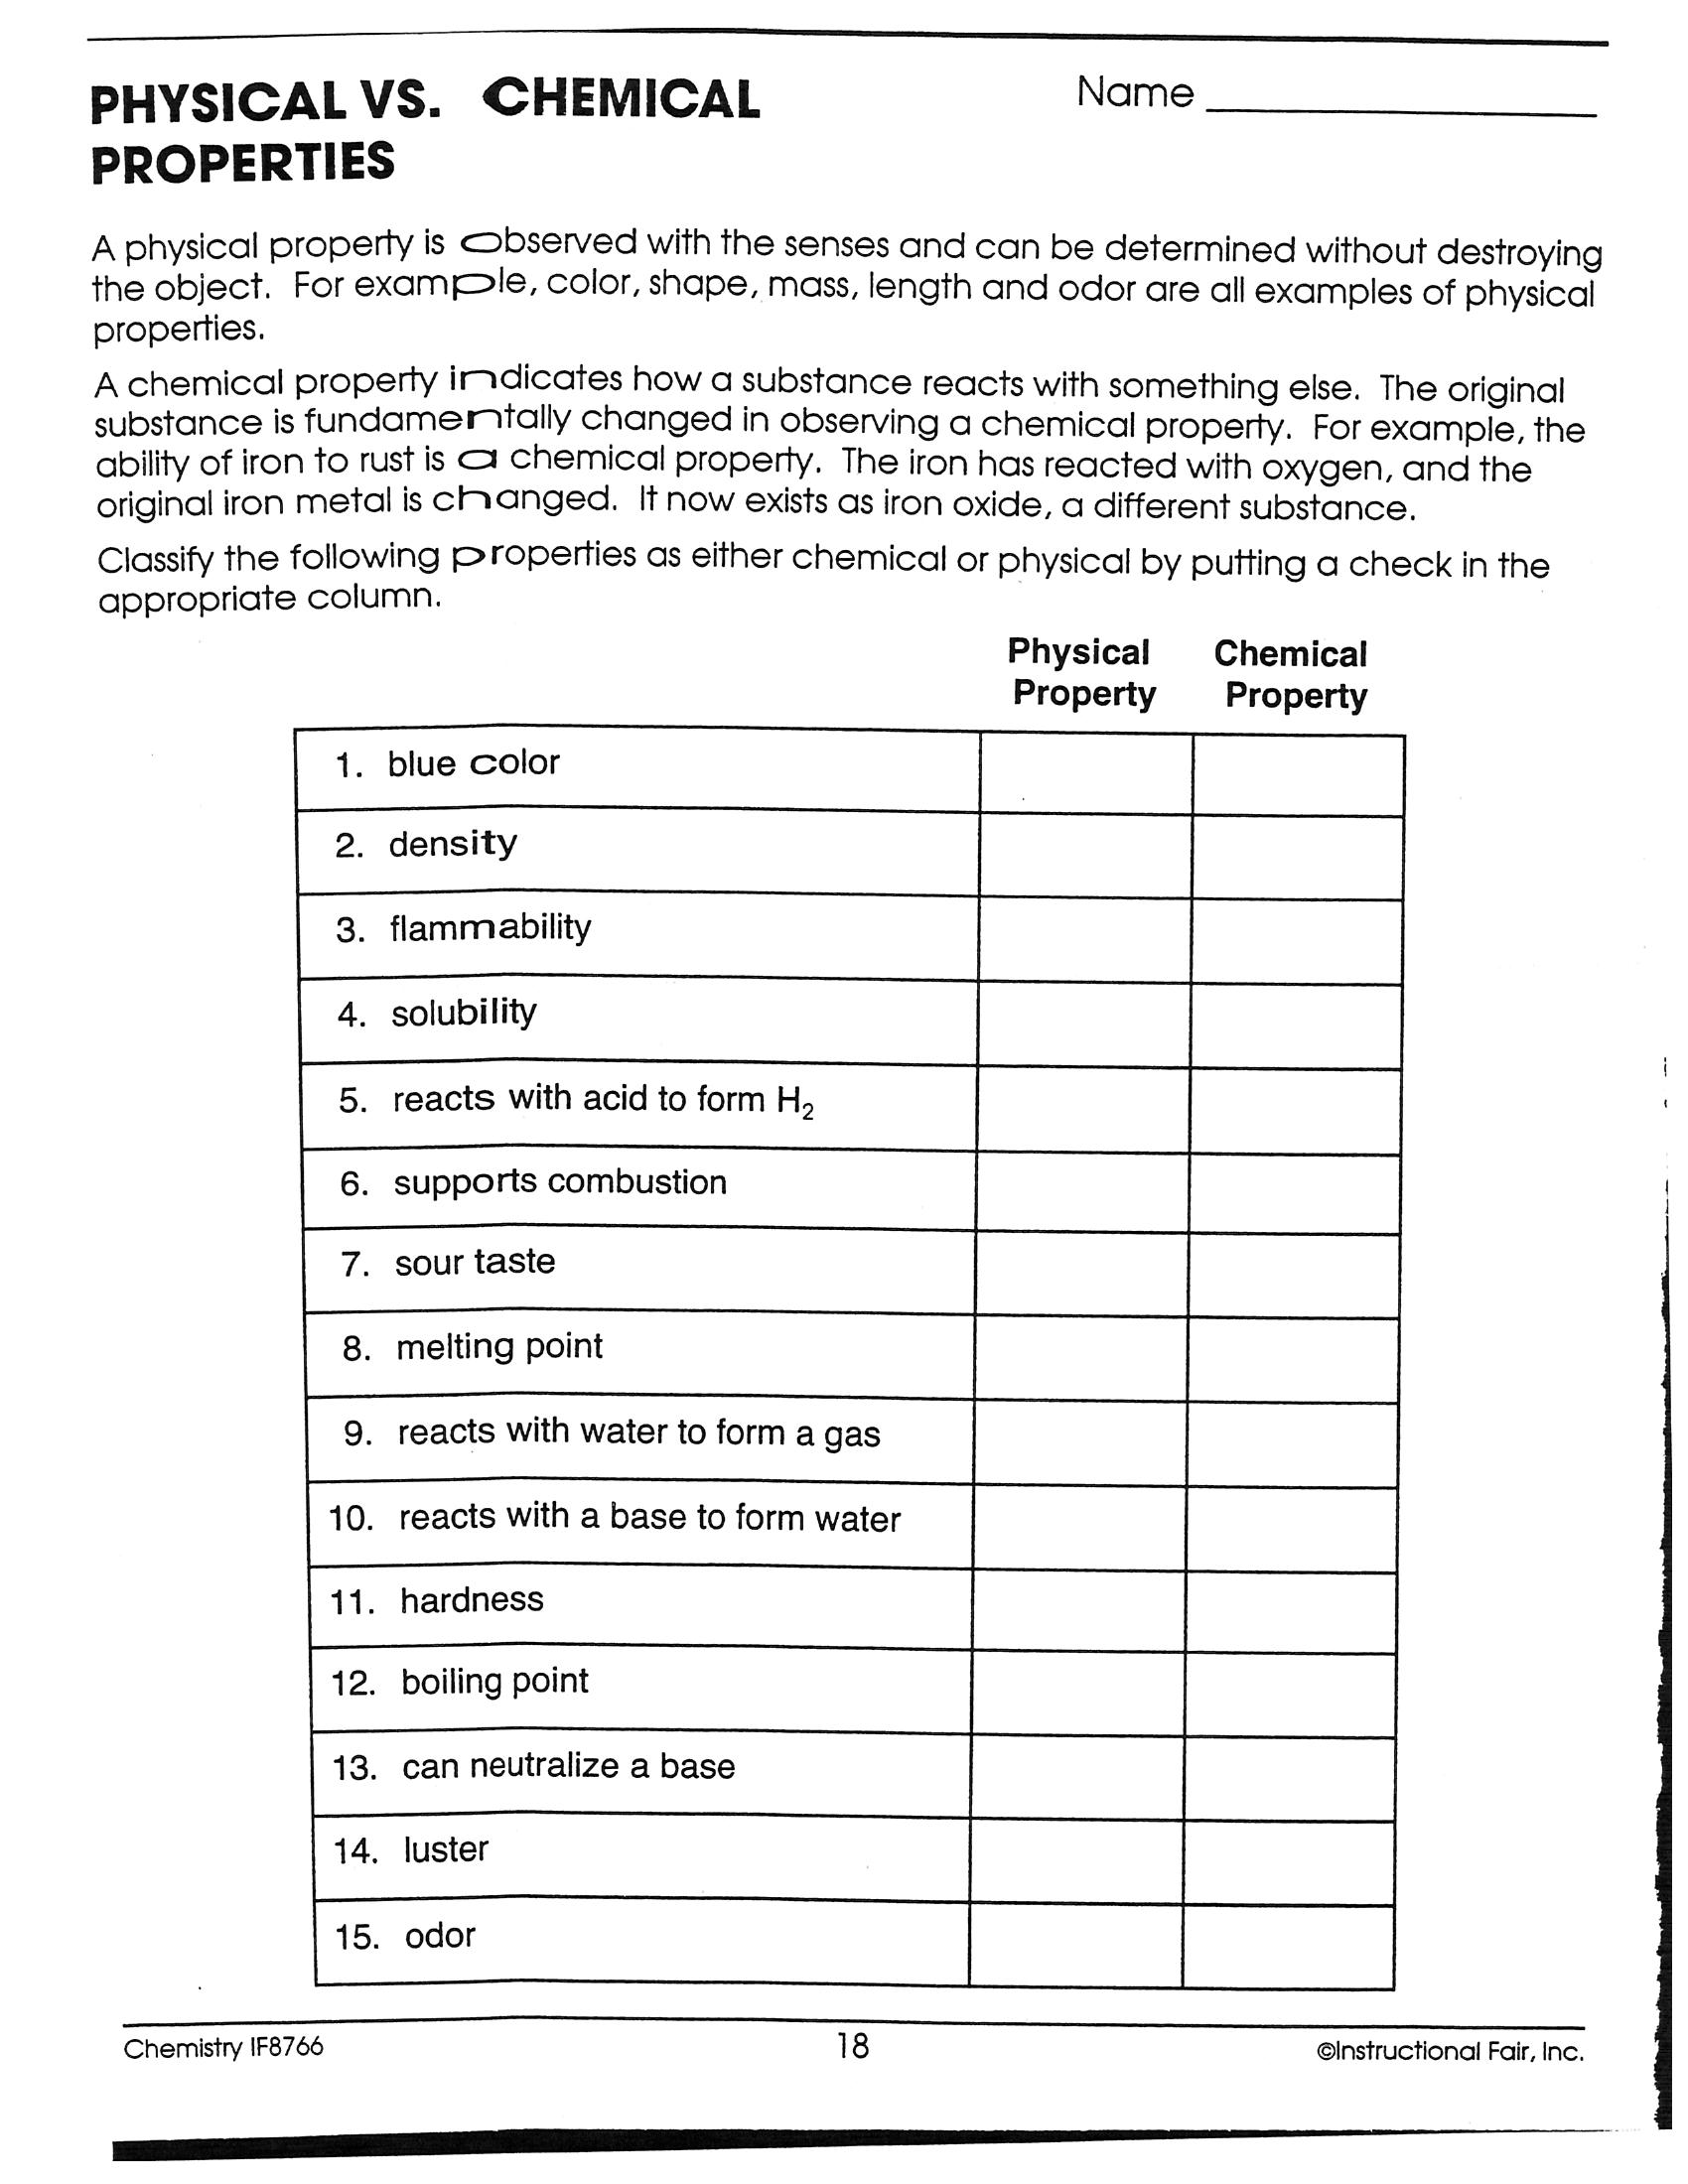 Physical Or Chemical Change? - Lessons - Blendspace Within Physical Vs Chemical Properties Worksheet